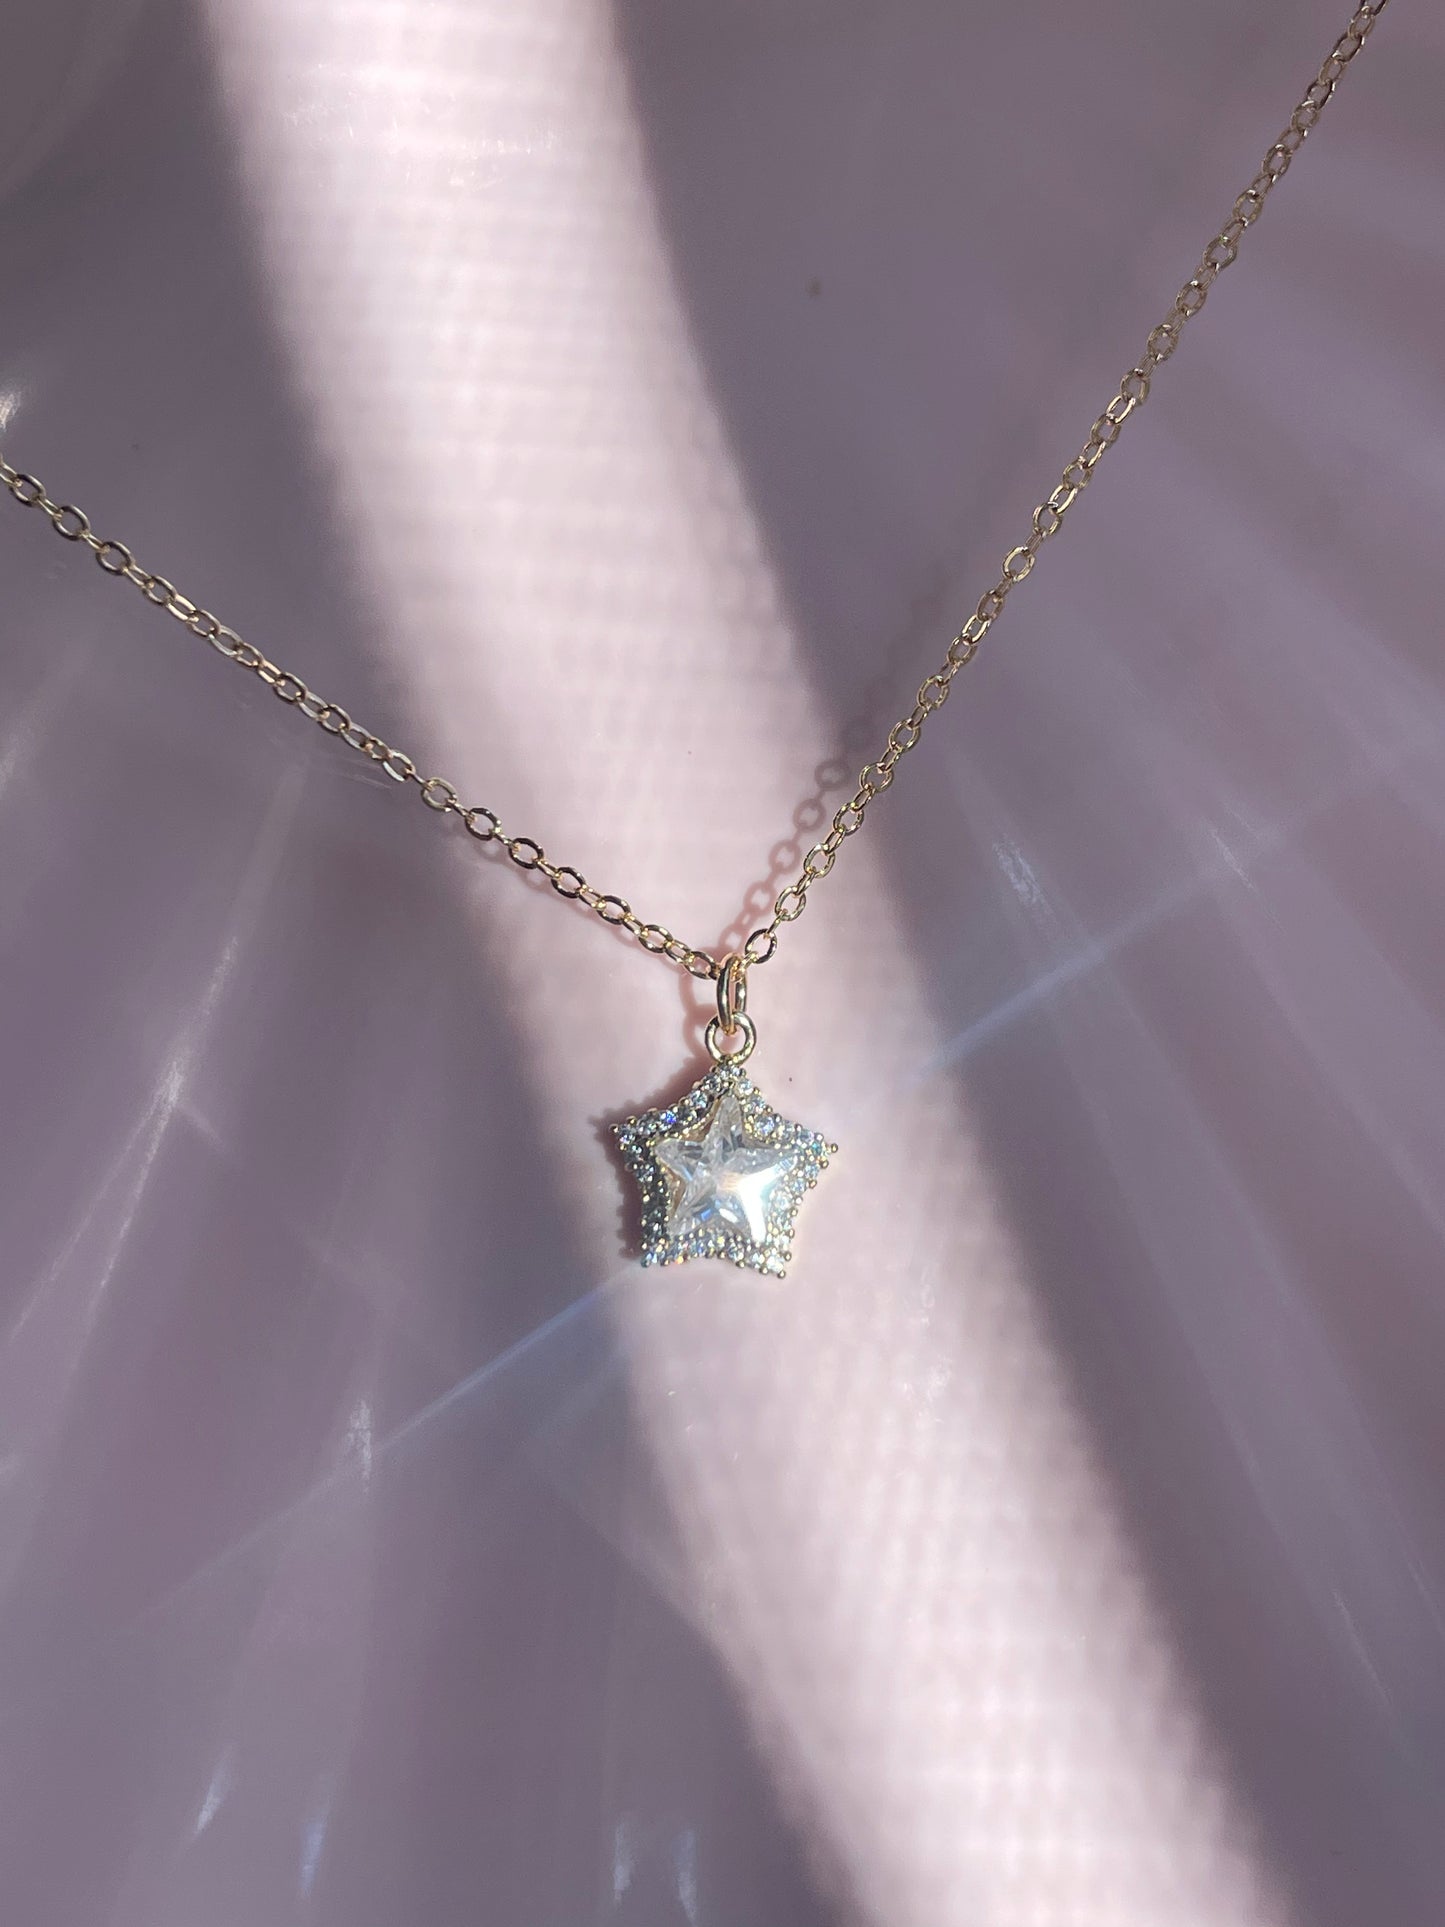 Stargirl Crystal Necklace-Stainless Steel